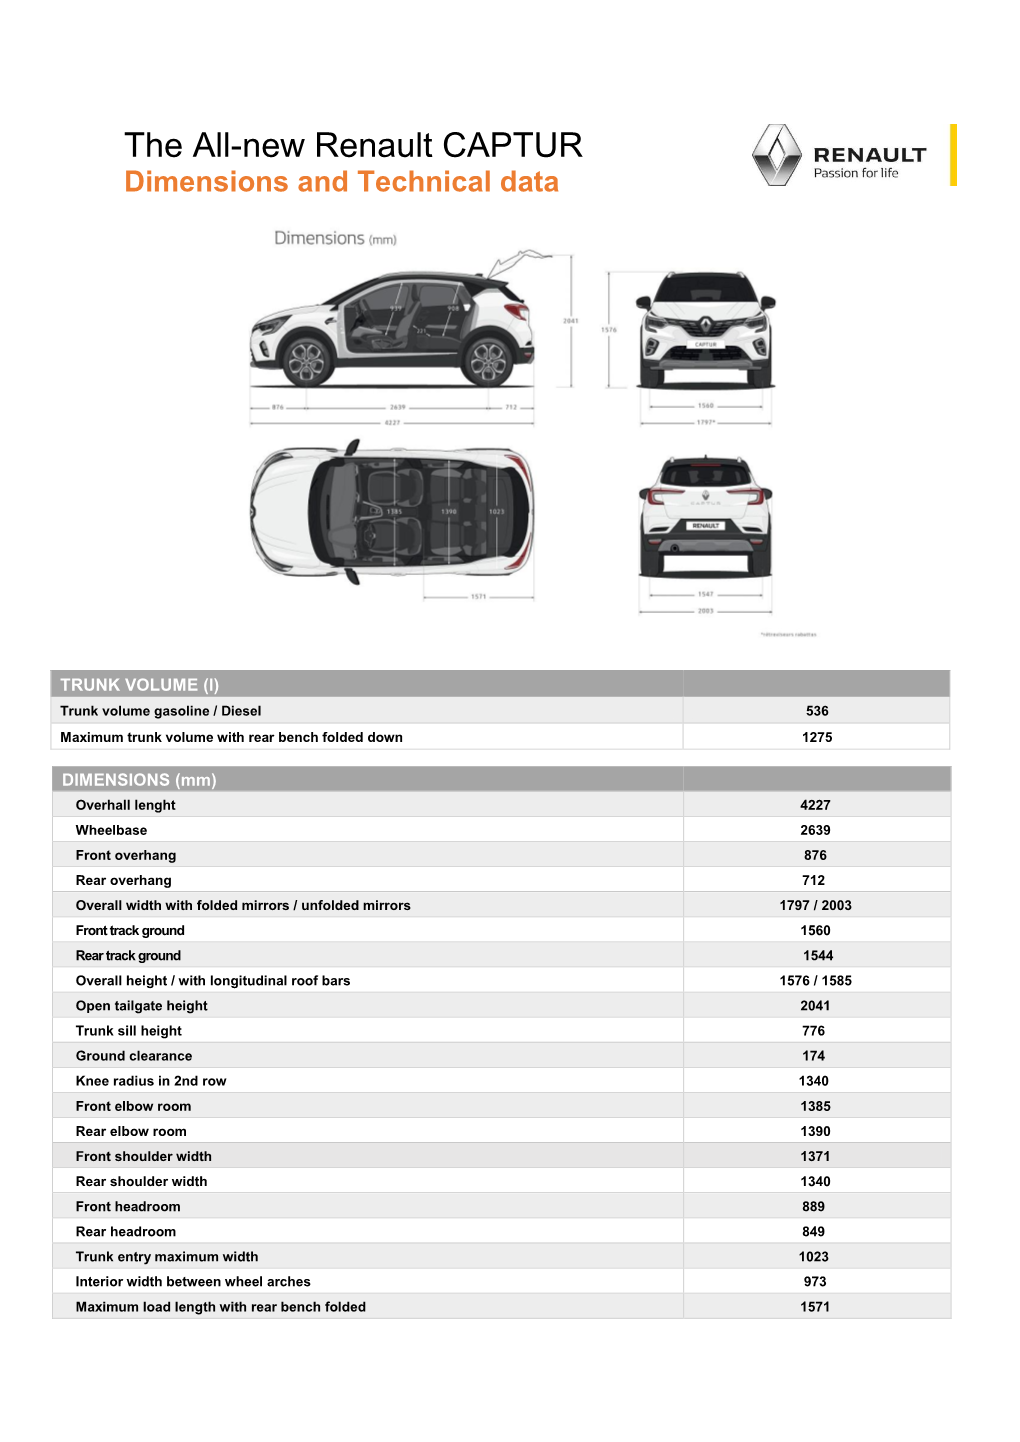 The All-New Renault CAPTUR Dimensions and Technical Data